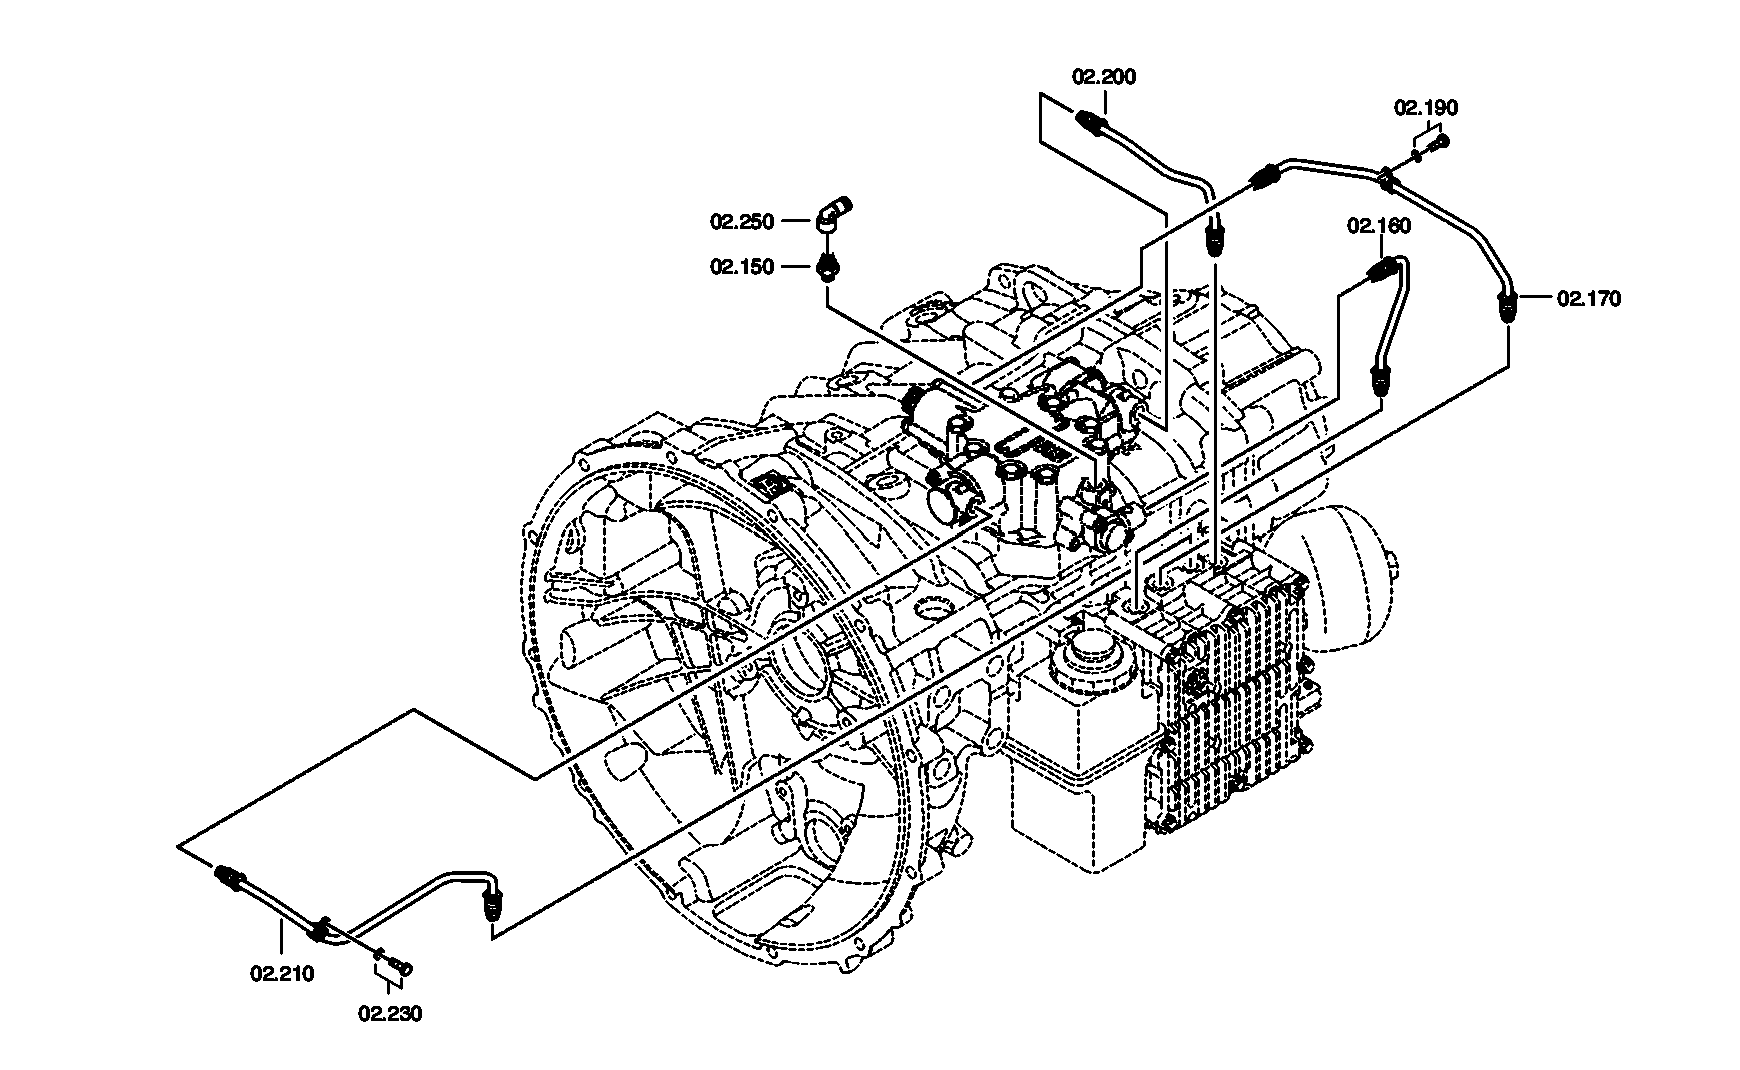 drawing for DAF 1821349 - TRANSMISSION ACTUATOR (figure 2)